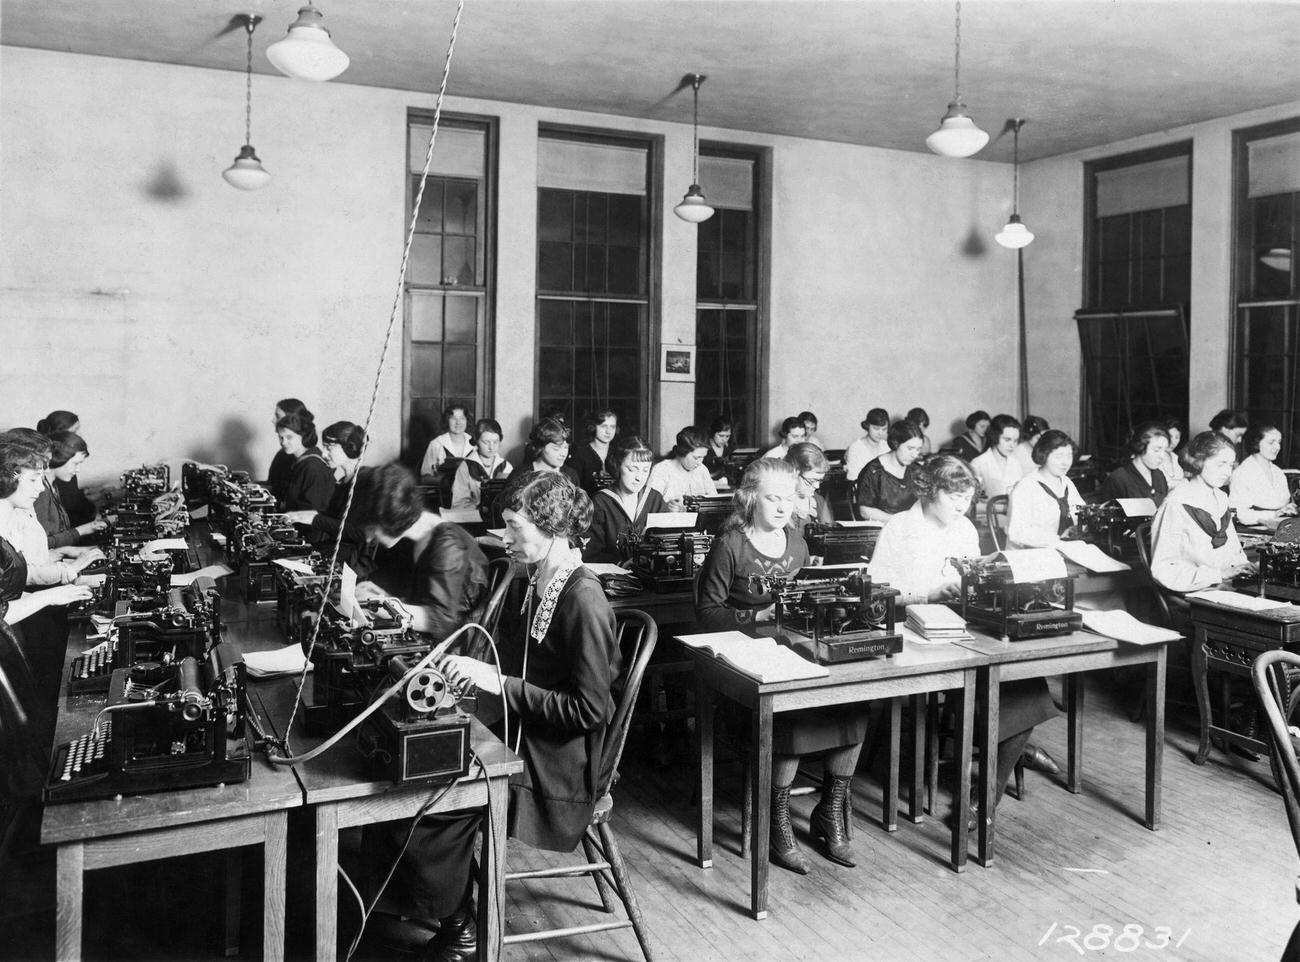 Women employees of Westinghouse Company attending typewriting class at Westinghouse Technical Night School.